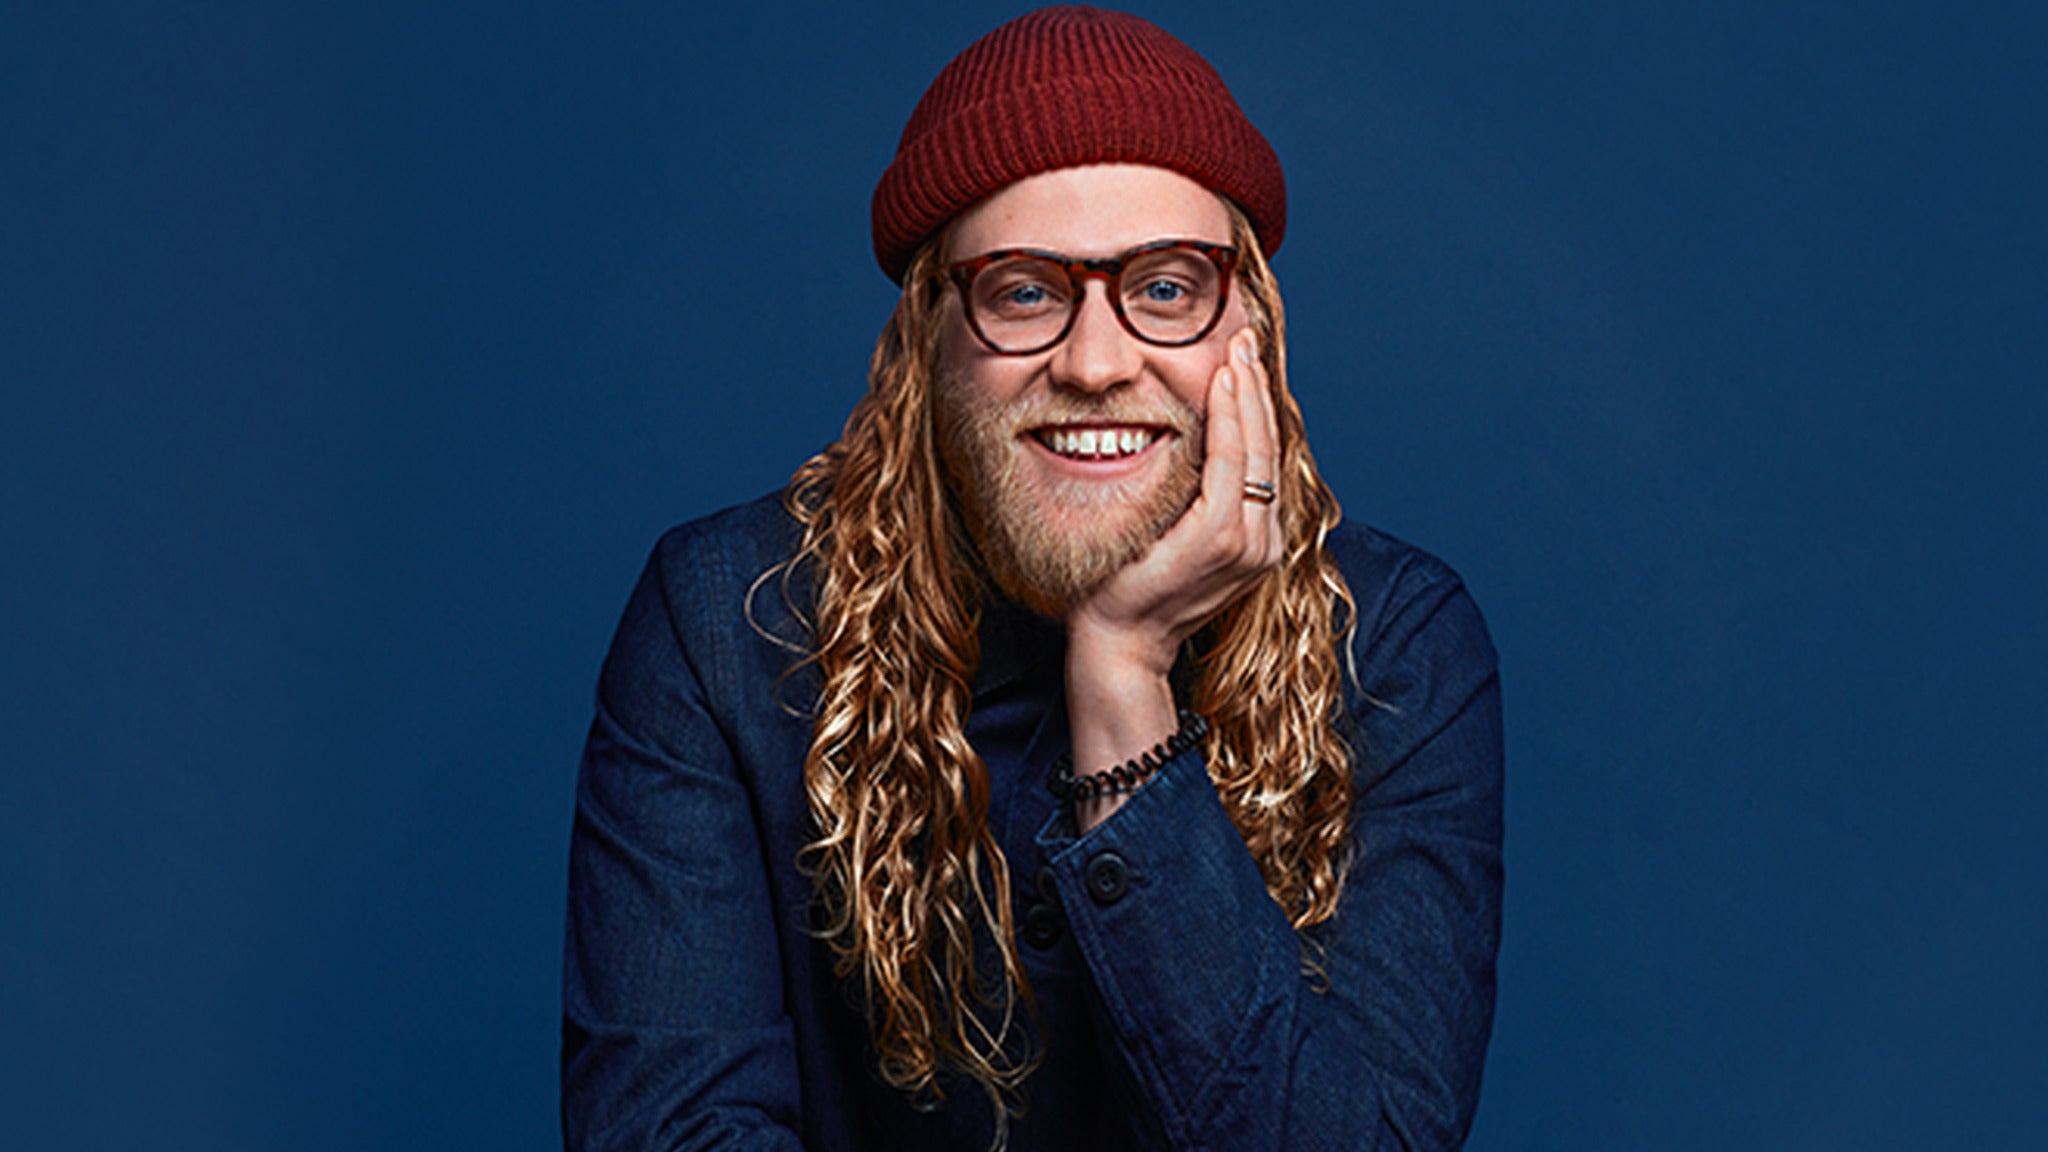 Image used with permission from Ticketmaster | Allen Stone tickets